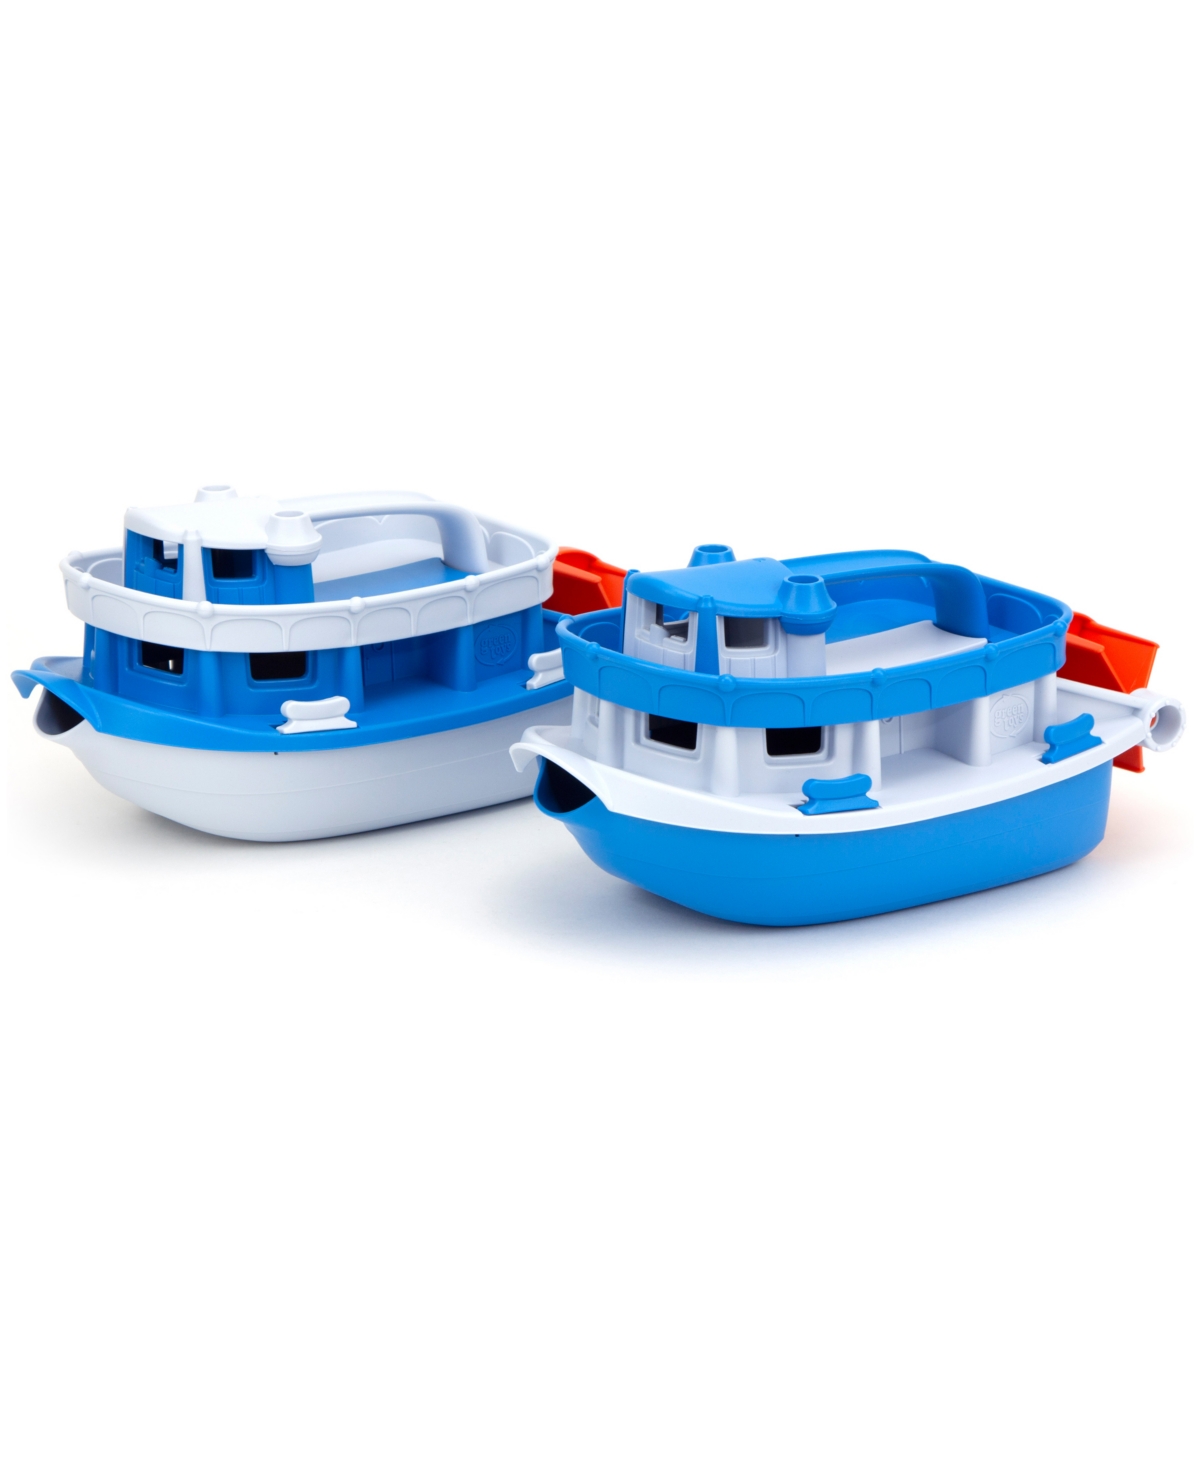 Shop Areyougame Green Toys Paddle Boat In No Color